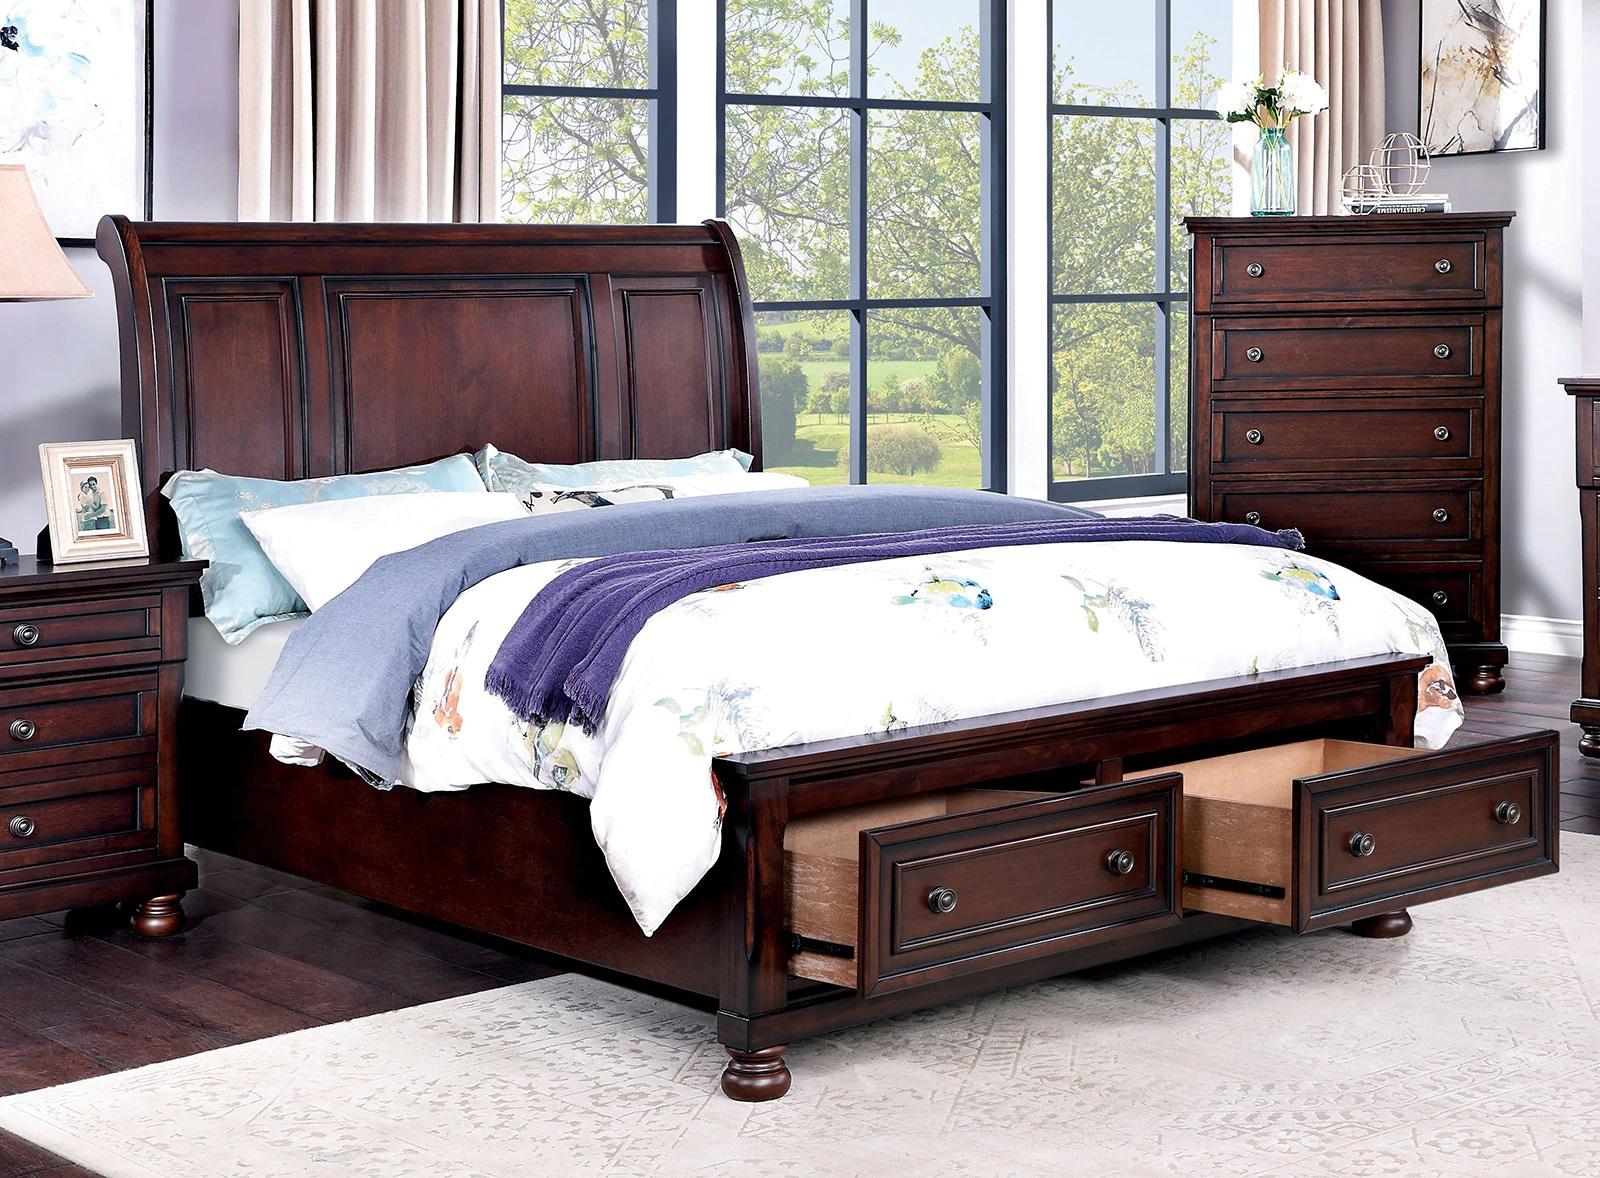 

    
Transitional Dark Cherry Solid Wood Queen Bedroom Set 6pcs Furniture of America CM7548CH-DR Wells
